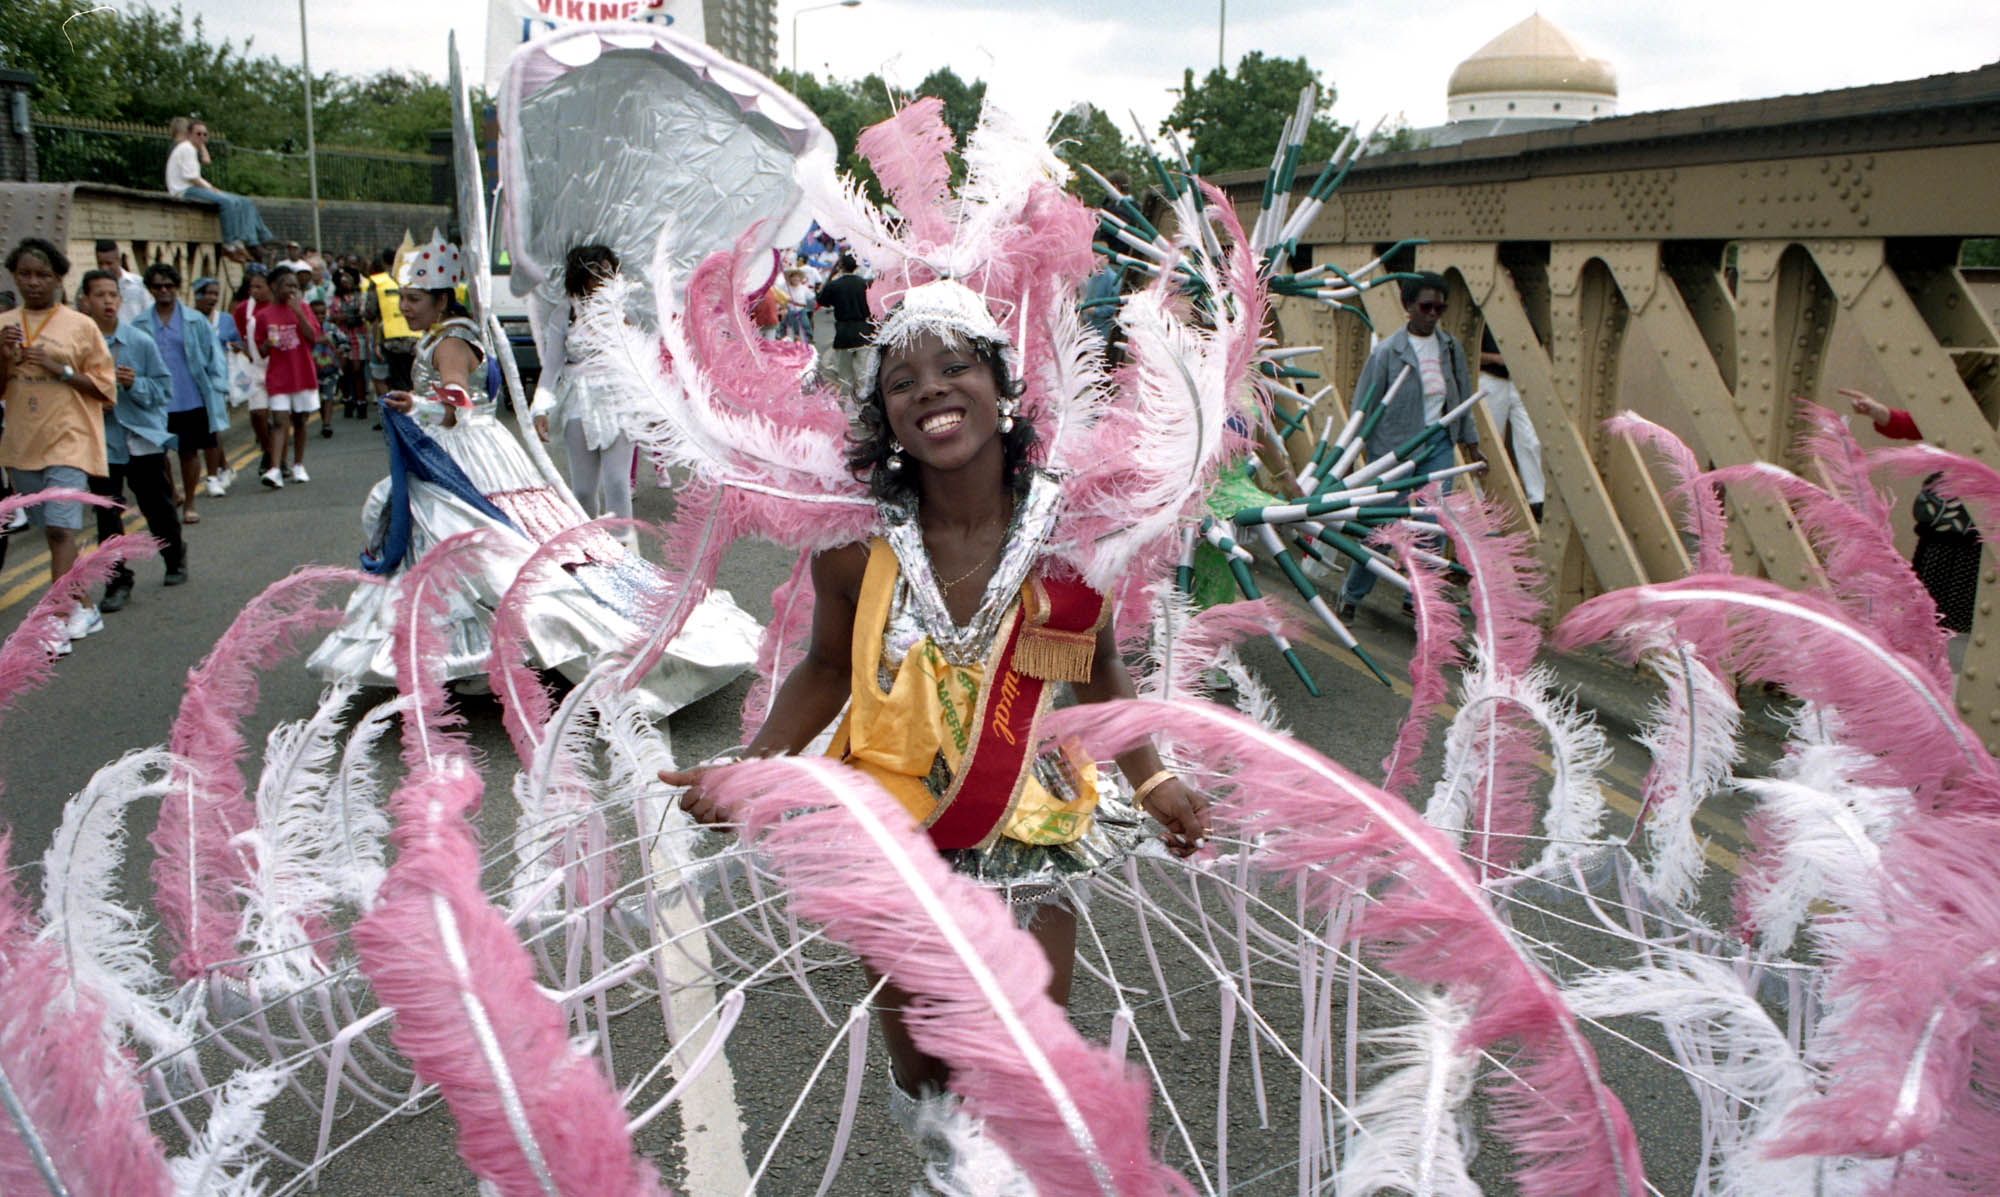 Many hours are spent preparing costumes for the parade, 1993 - 